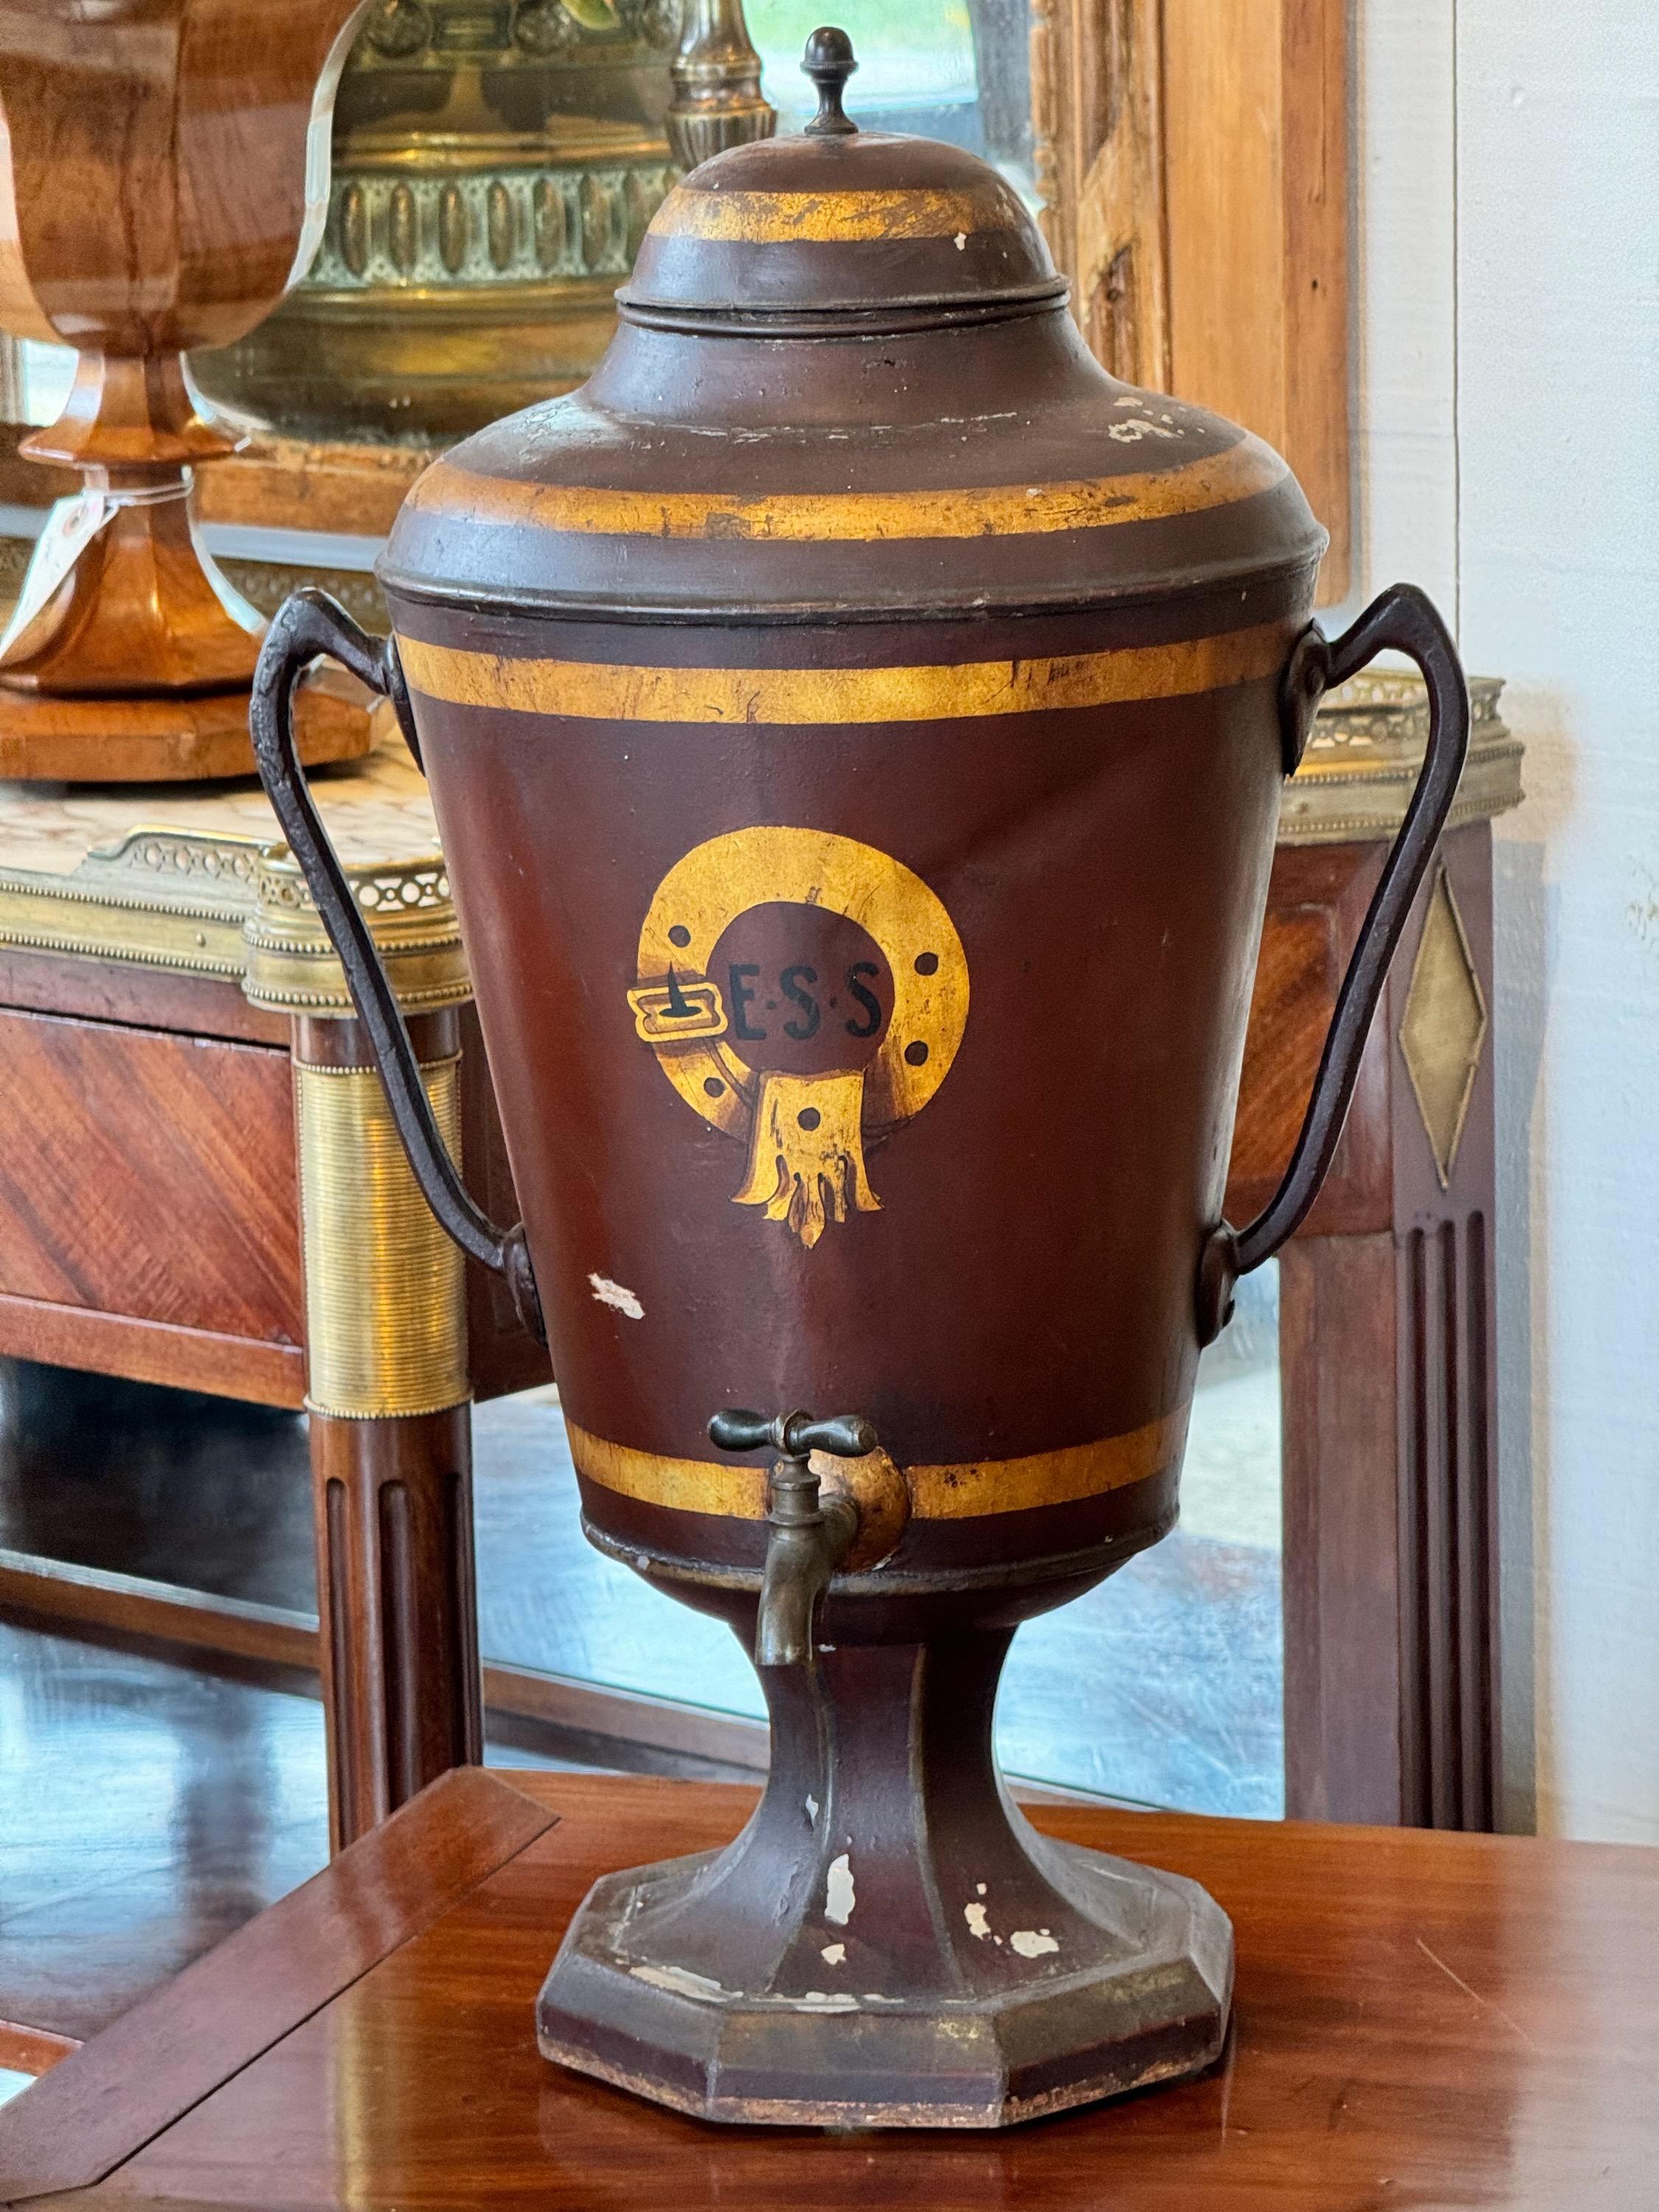 A paint Decorated tole water urn with great charm. A nice center piece for a console or table.